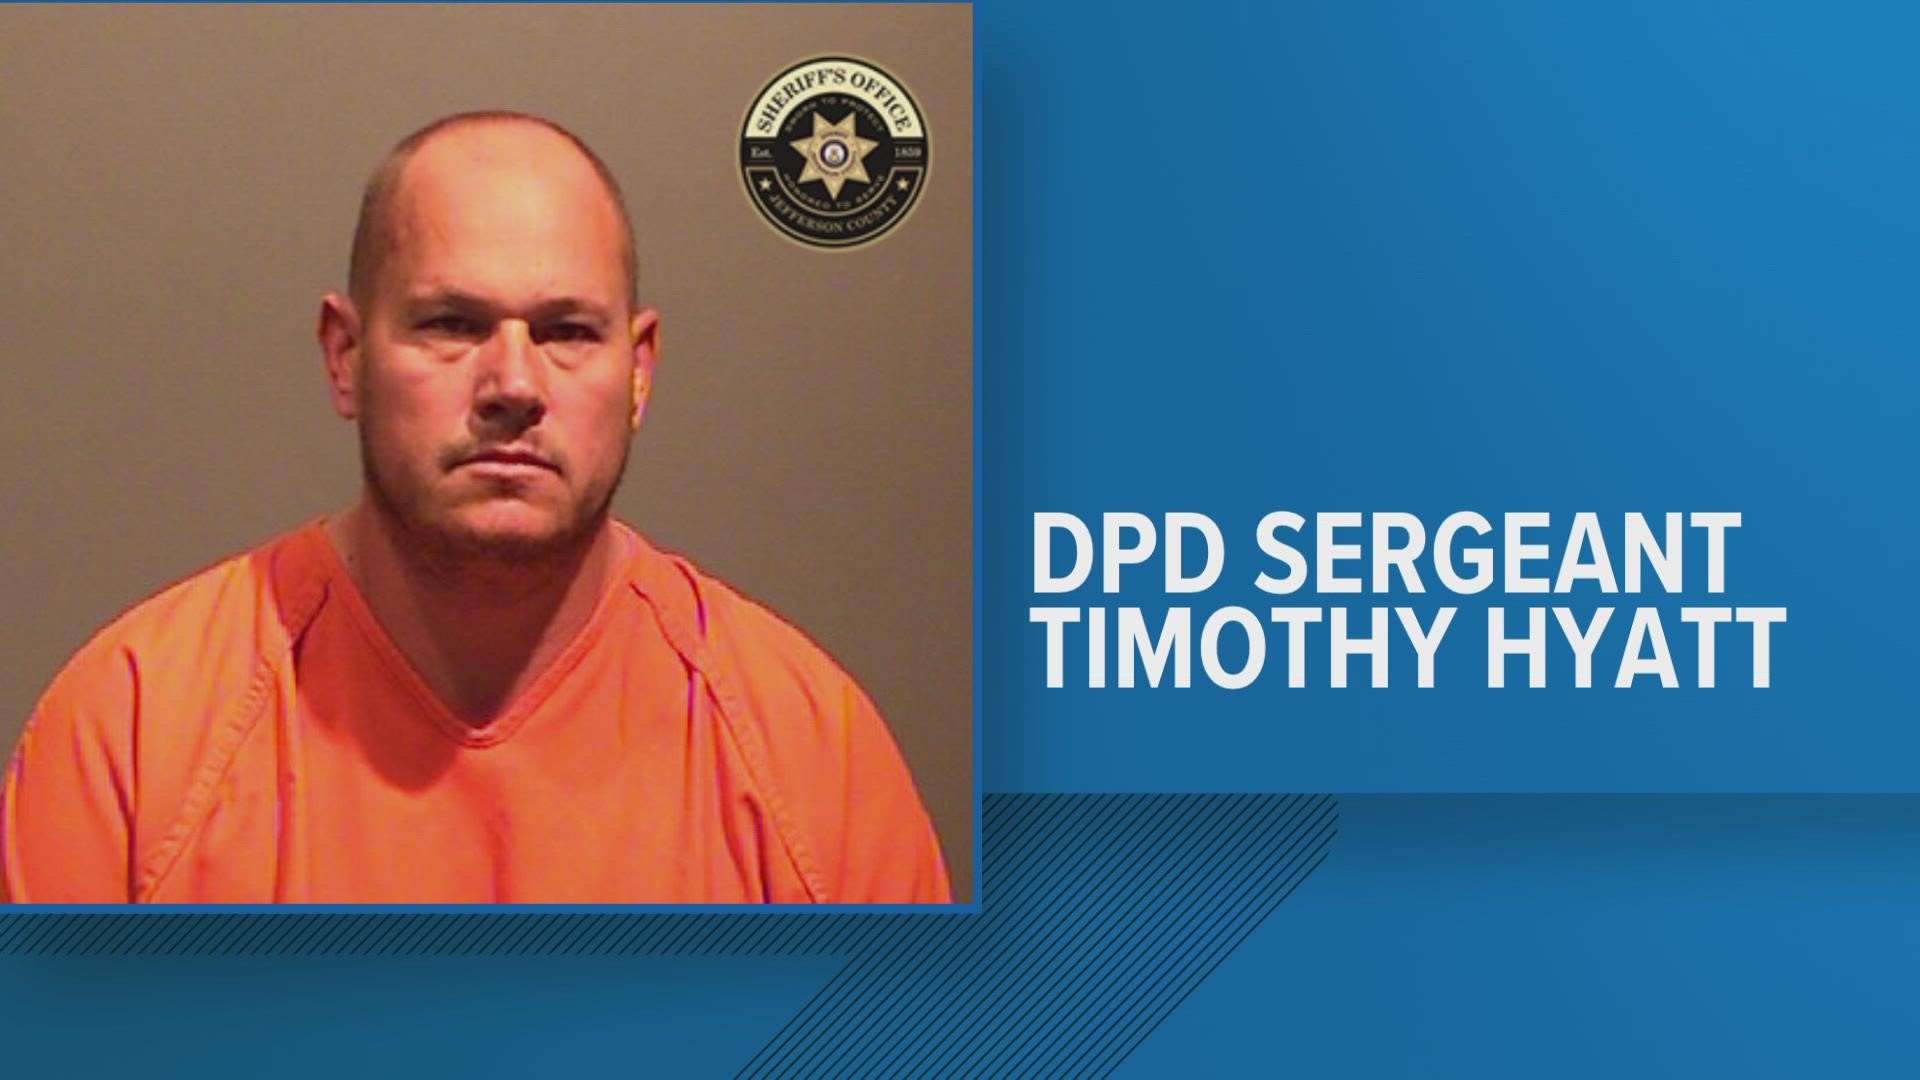 Timothy Hyatt turned himself in and was being held in the Jefferson County jail on suspicion of internet luring of a child.